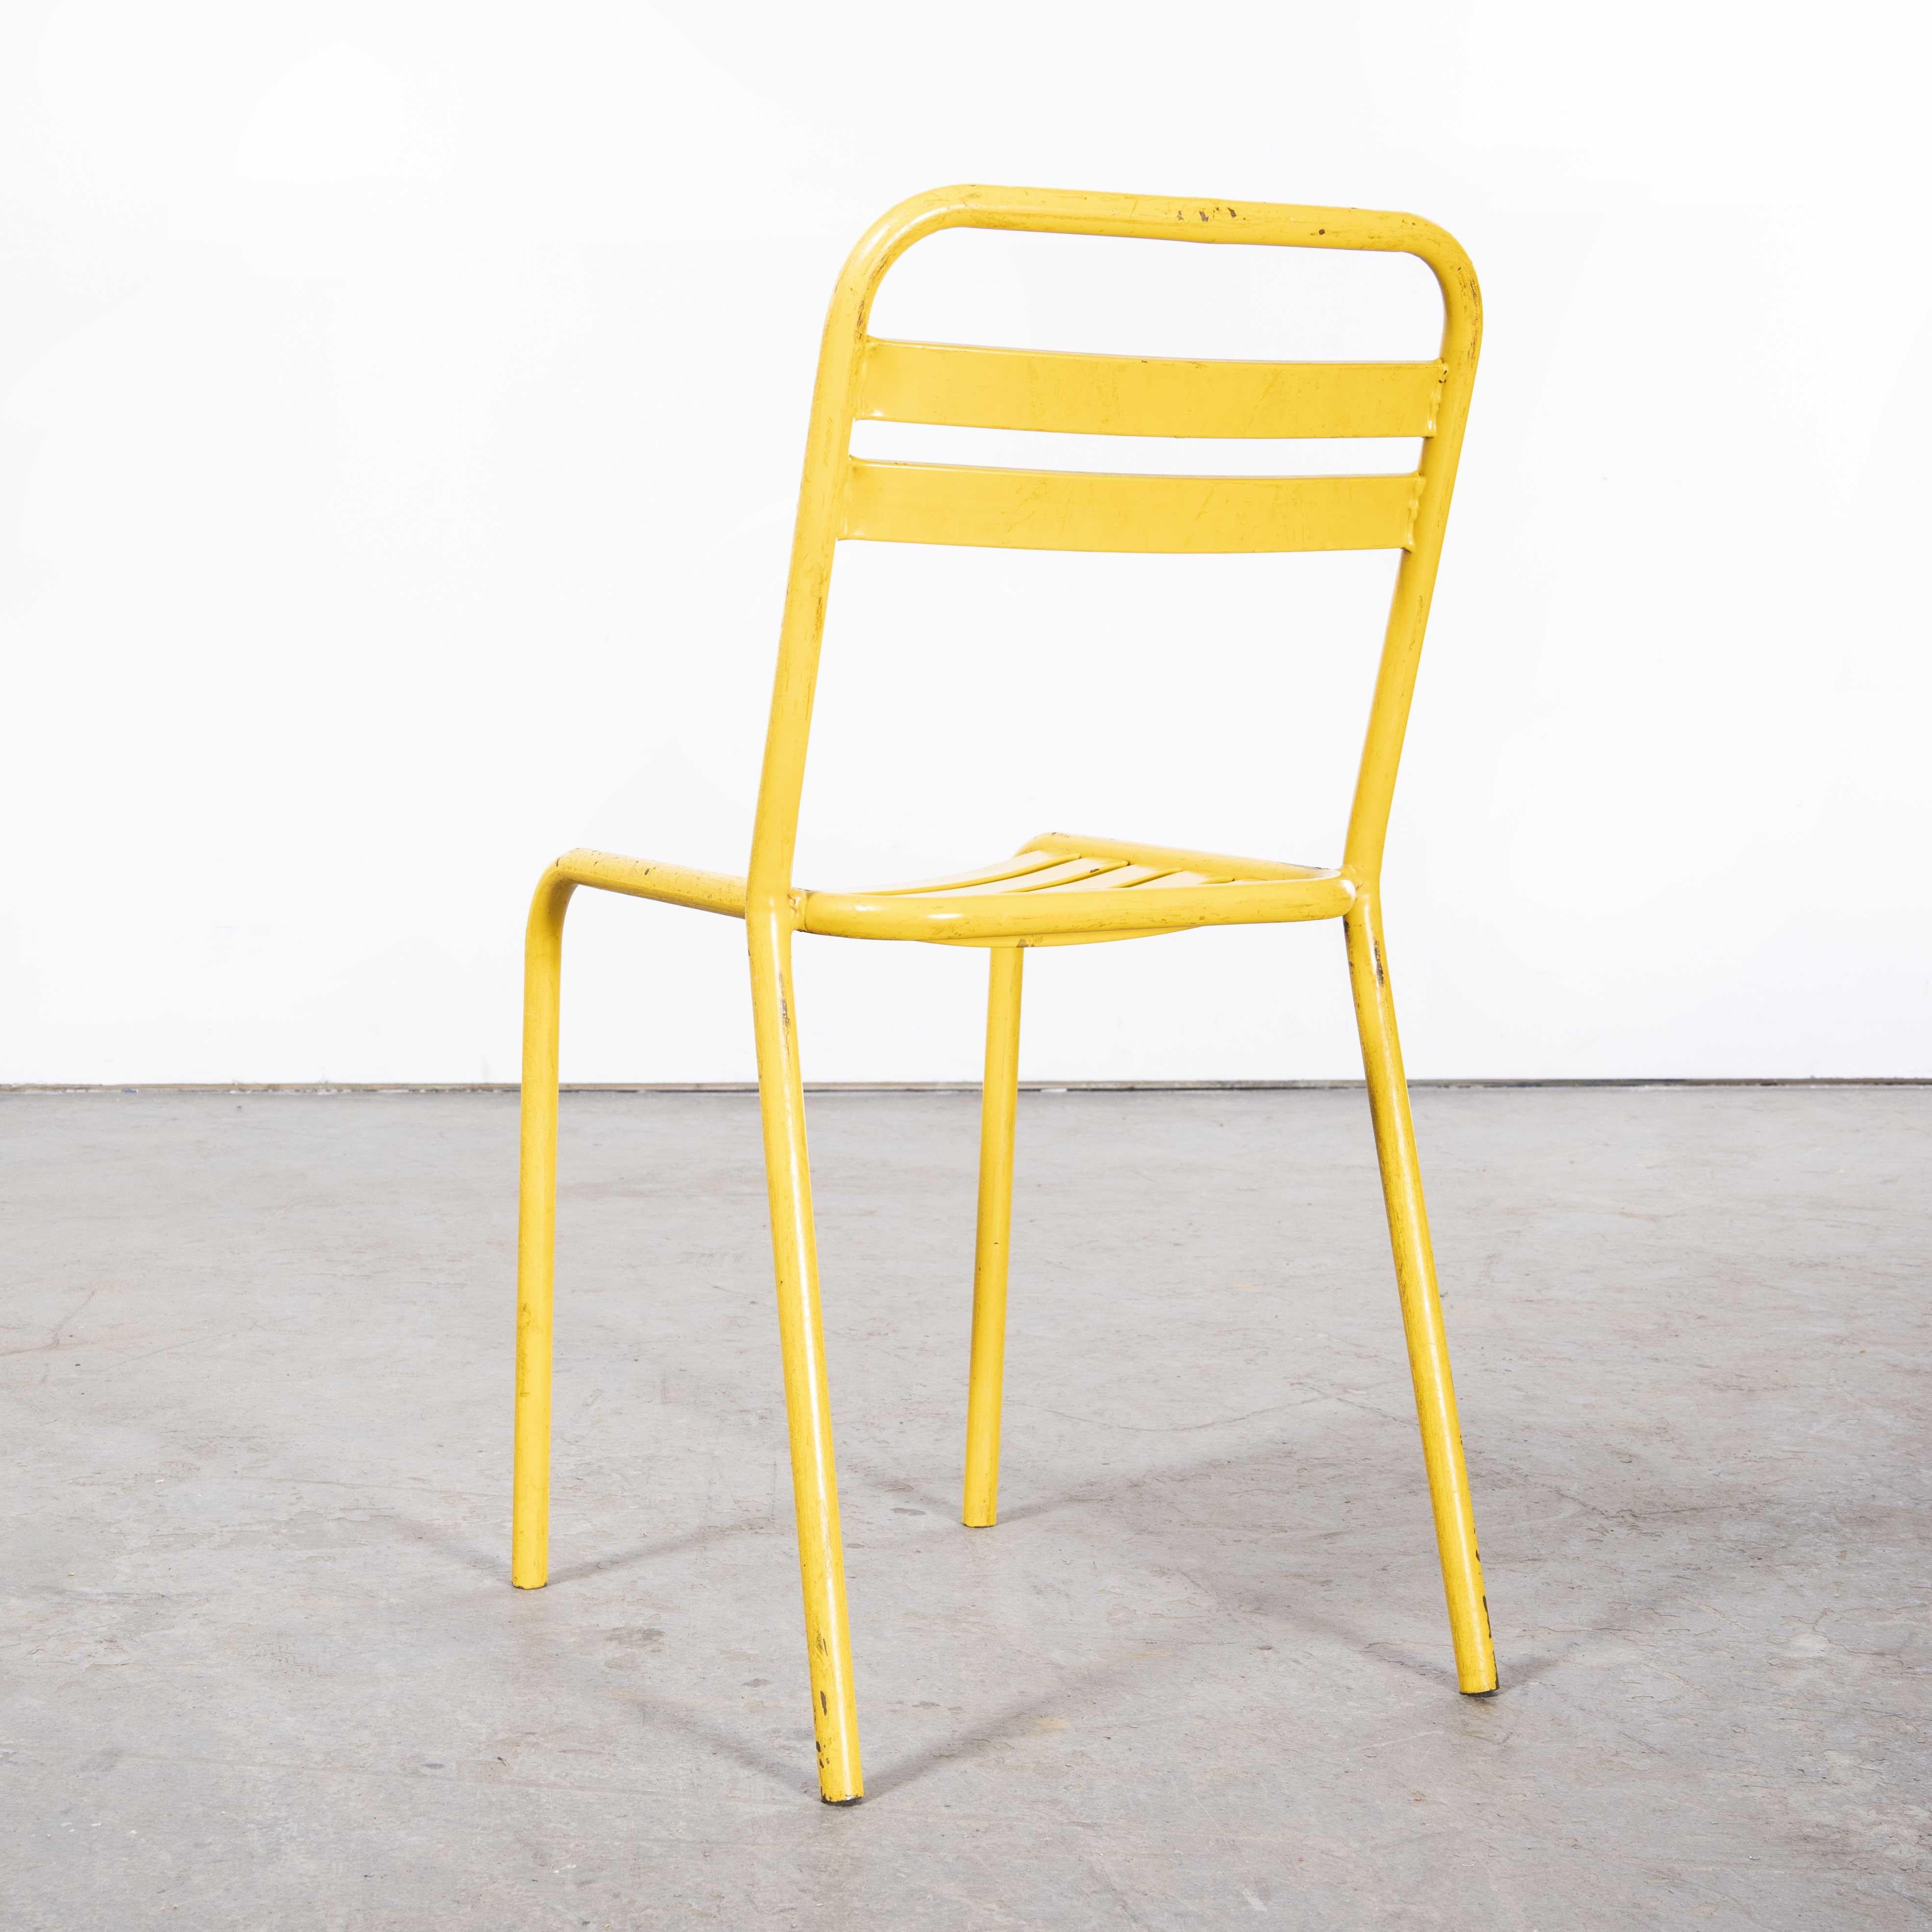 1950's Original Yellow French Tolix T2 Metal Café Dining Chairs - Pair

1950's Original Yellow French Tolix T2 Metal Café Dining Chairs - Pair. Please note the images show four chairs but the listing is just for the last two chairs we have. Tolix is